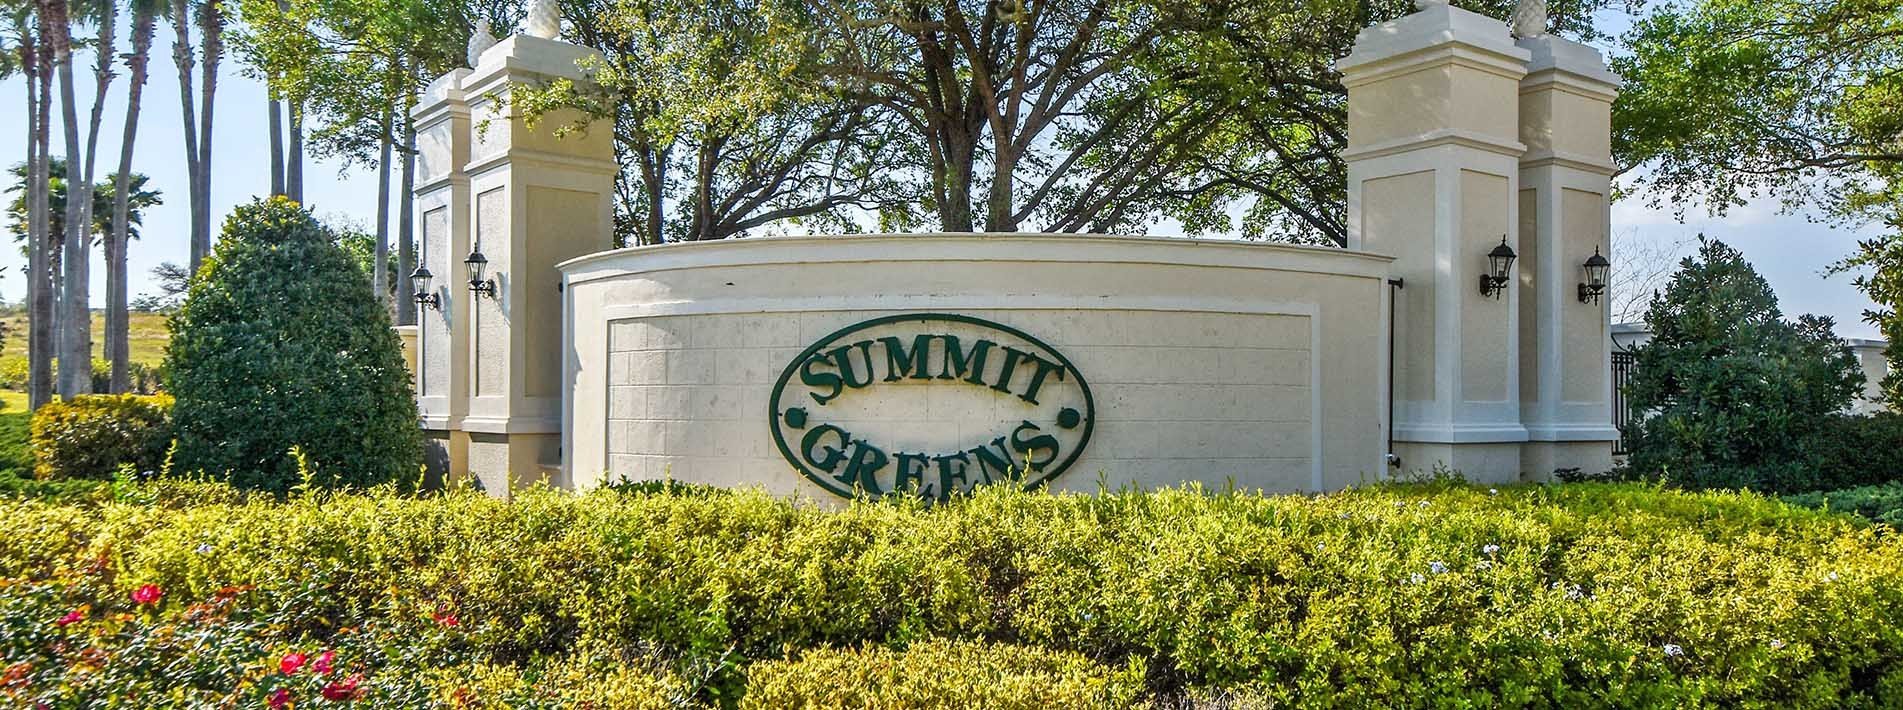 Summit Greens - 55+ Active Adult Community - Clermont, Fl